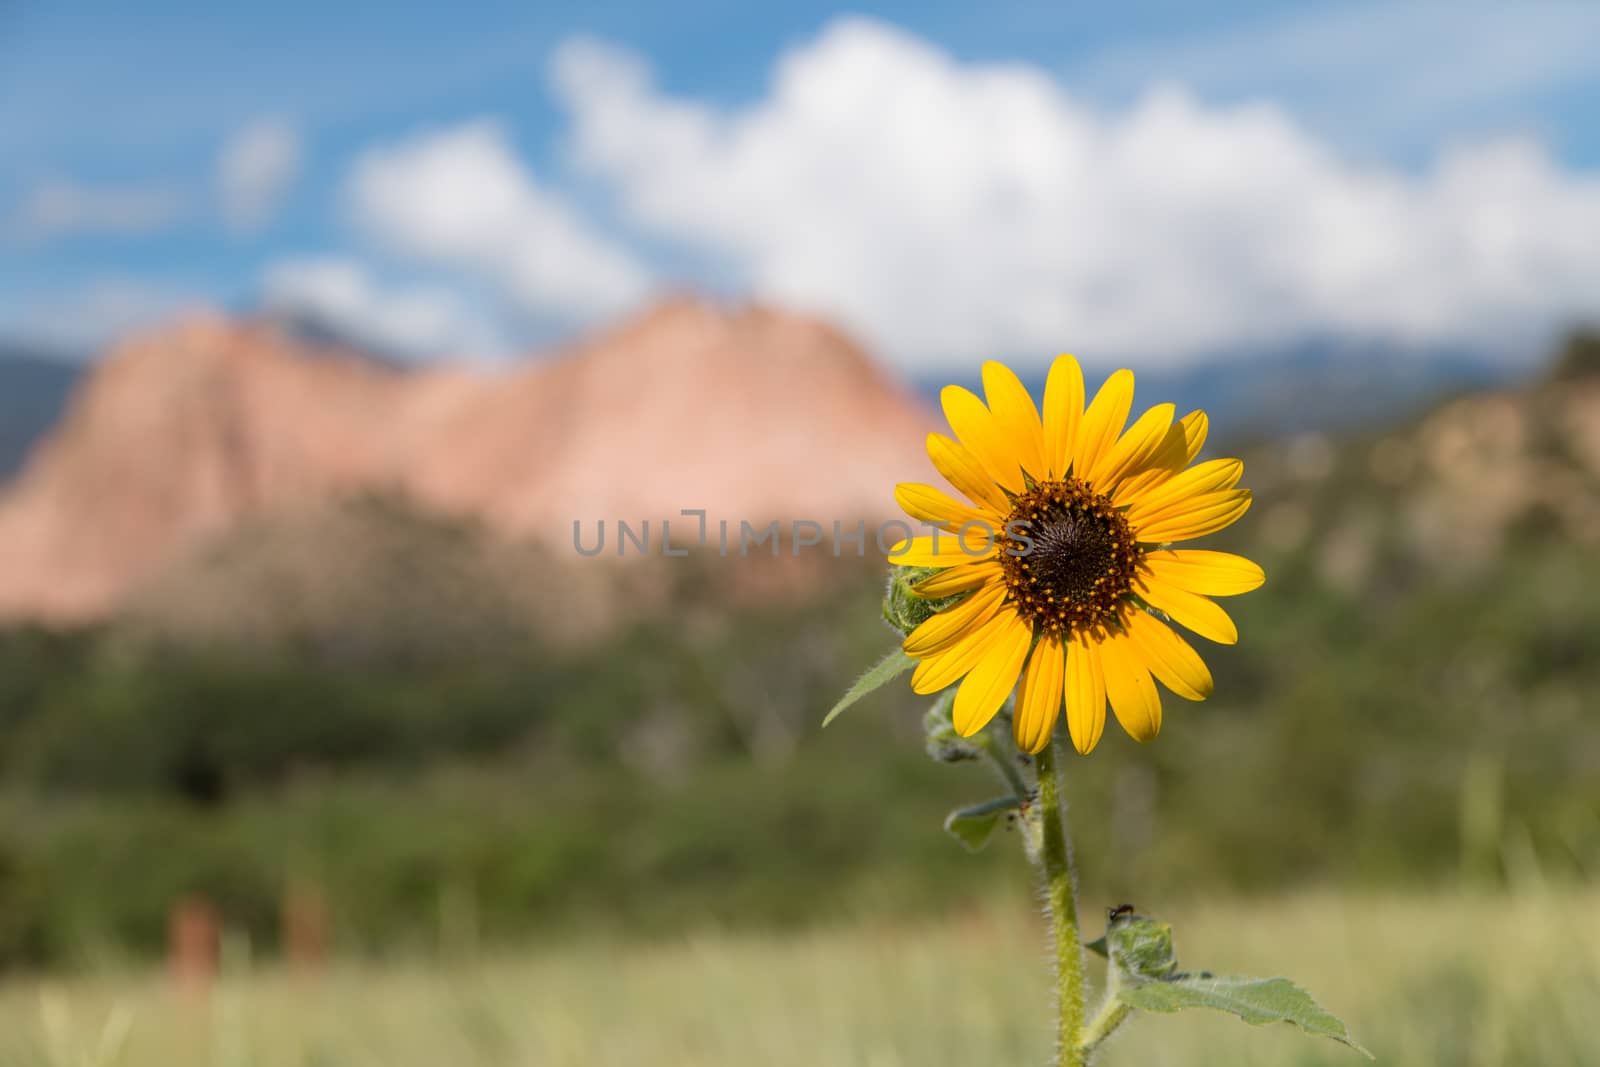 A beautiful sunflower growing in the Garden of the Gods, with Cathedral Rock in the background.